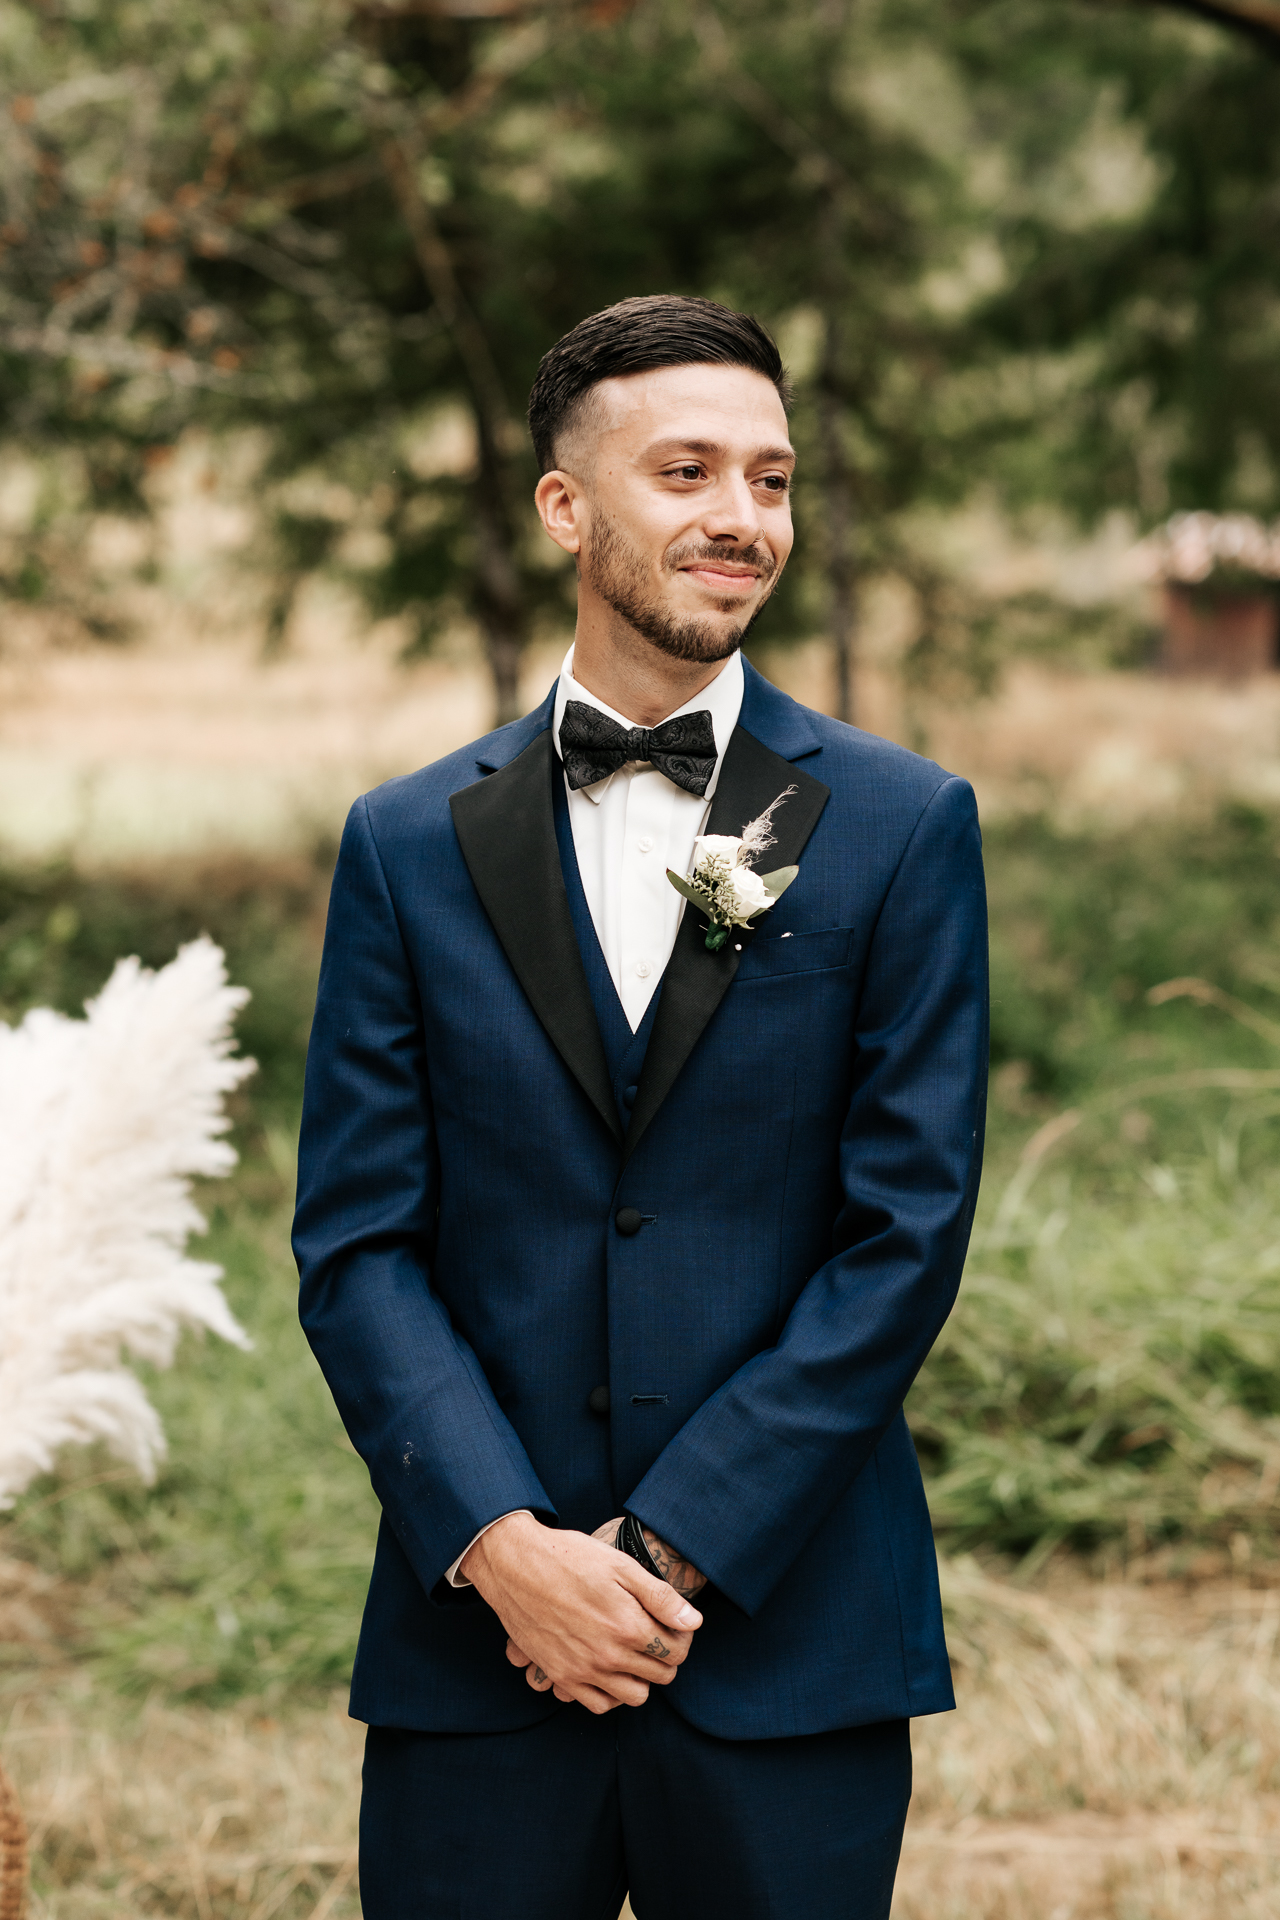 Groom sees his bride for the first time when she is walking down the aisle